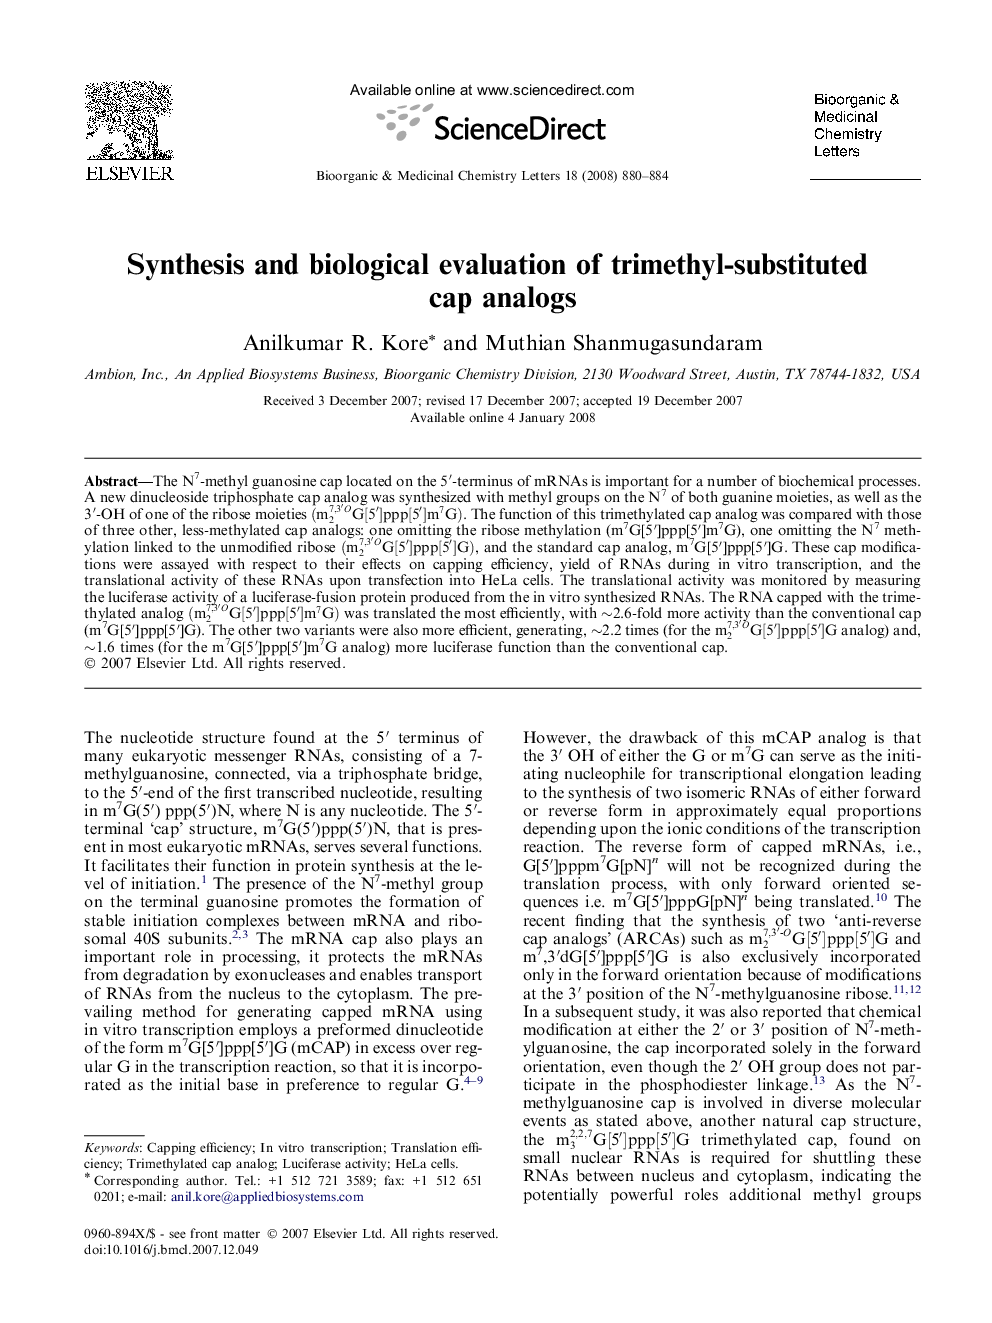 Synthesis and biological evaluation of trimethyl-substituted cap analogs